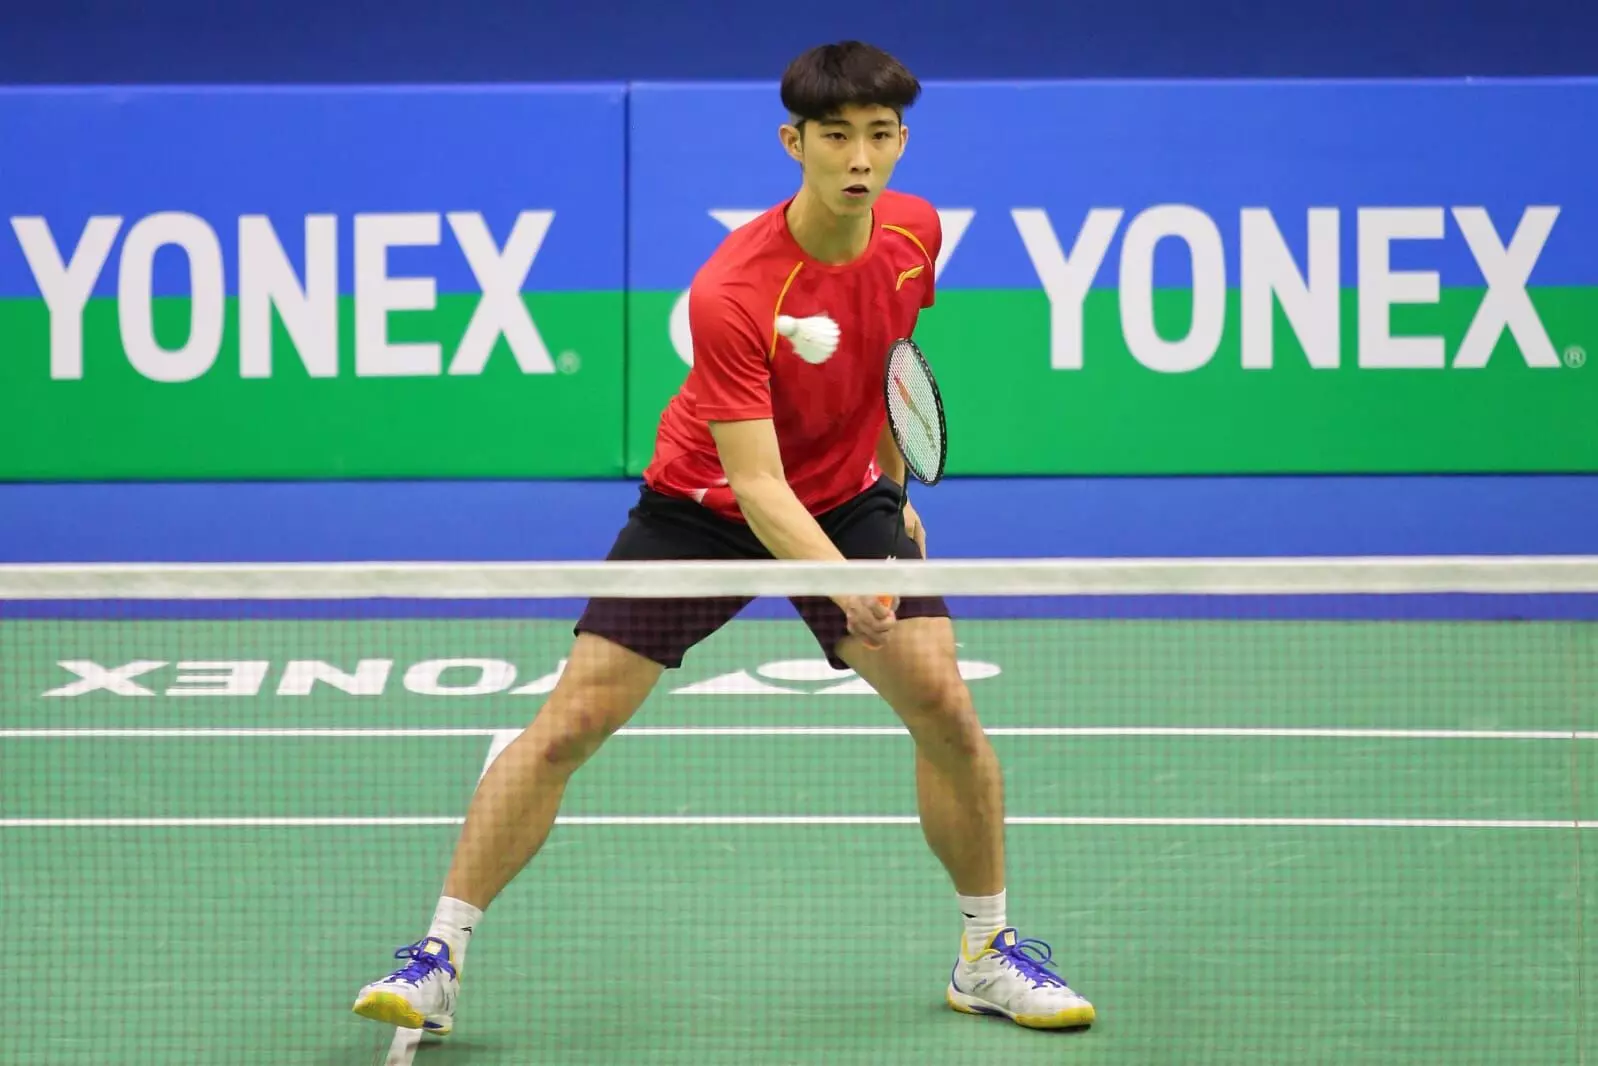 Loh Kean Yew in action at the India Open 2022 (Source: BAI)